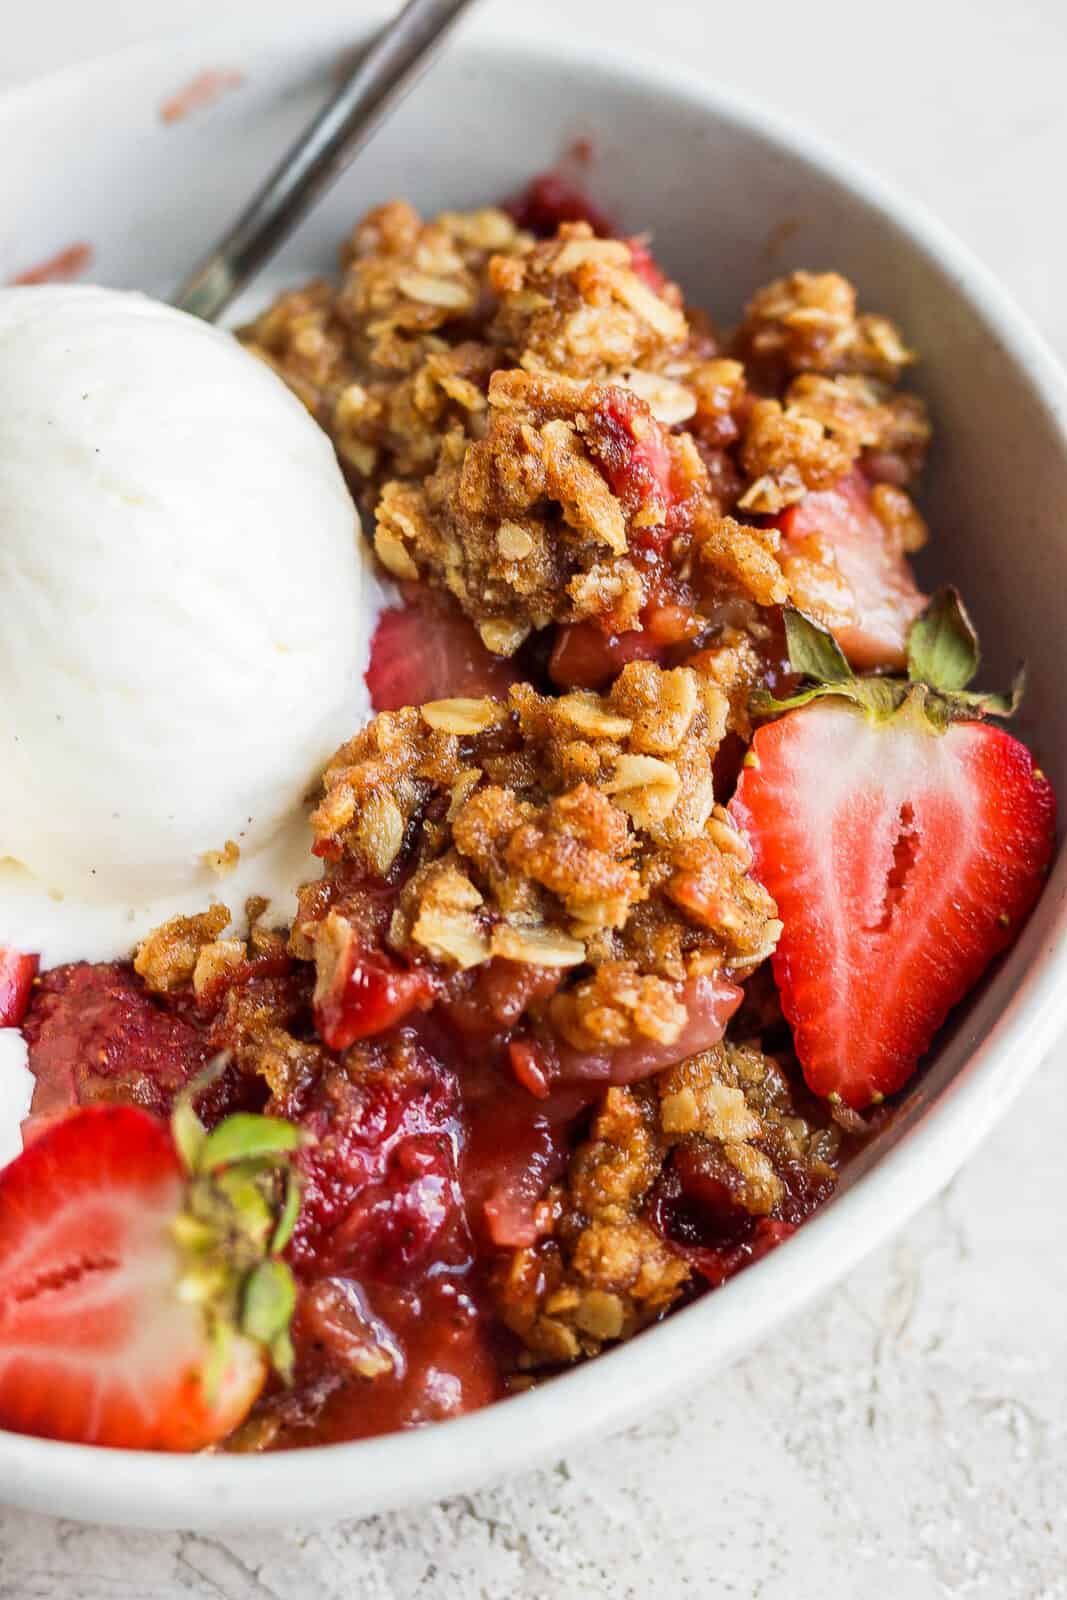 Strawberry crisp and ice cream in a bowl.